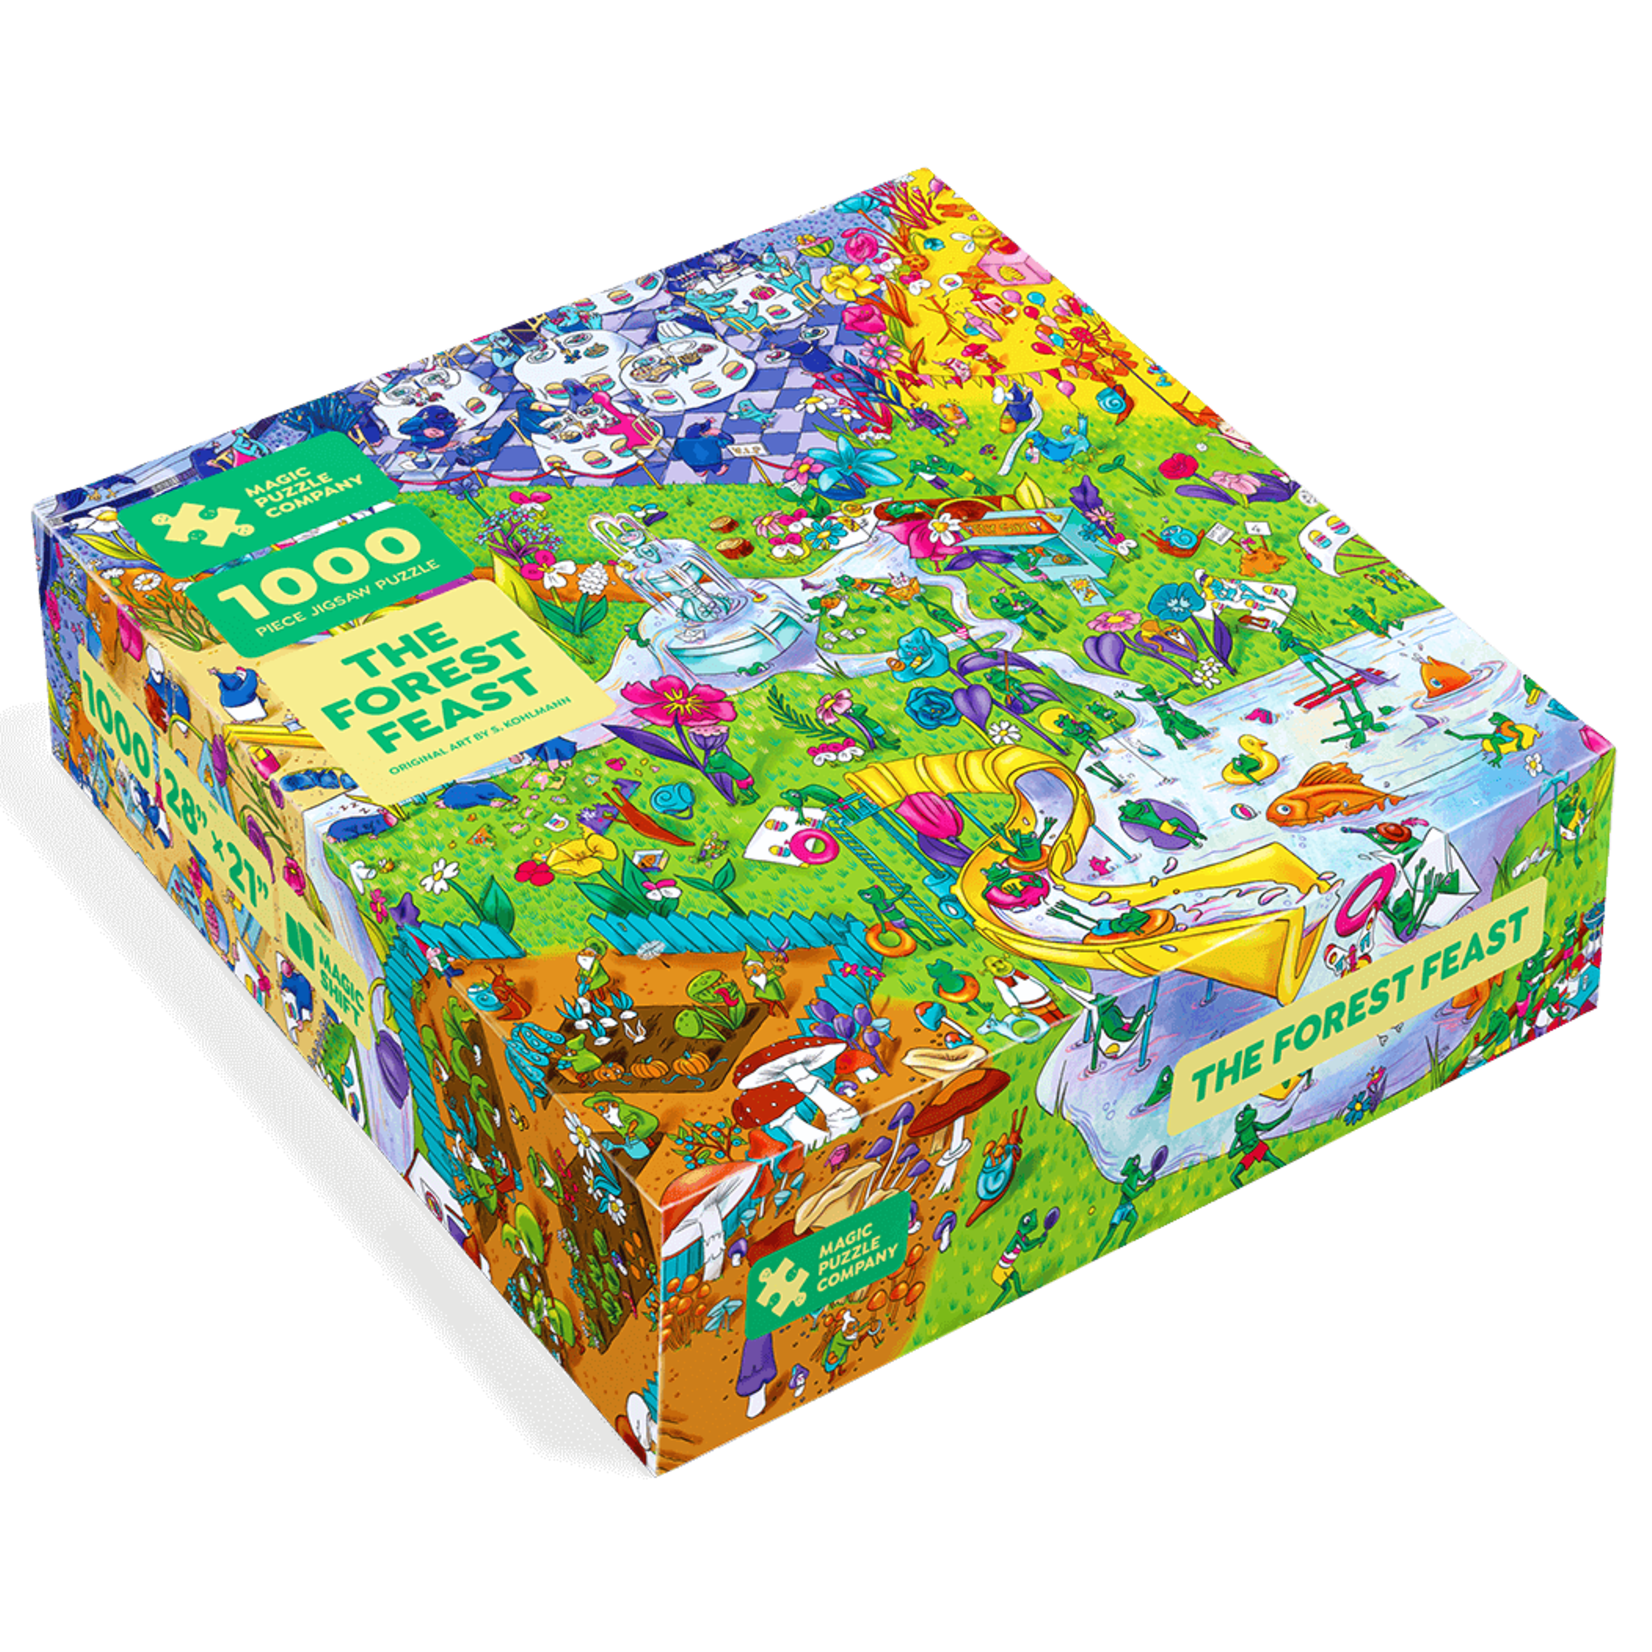 Magic Puzzle Company 1000 pc Puzzle The Forest Feast